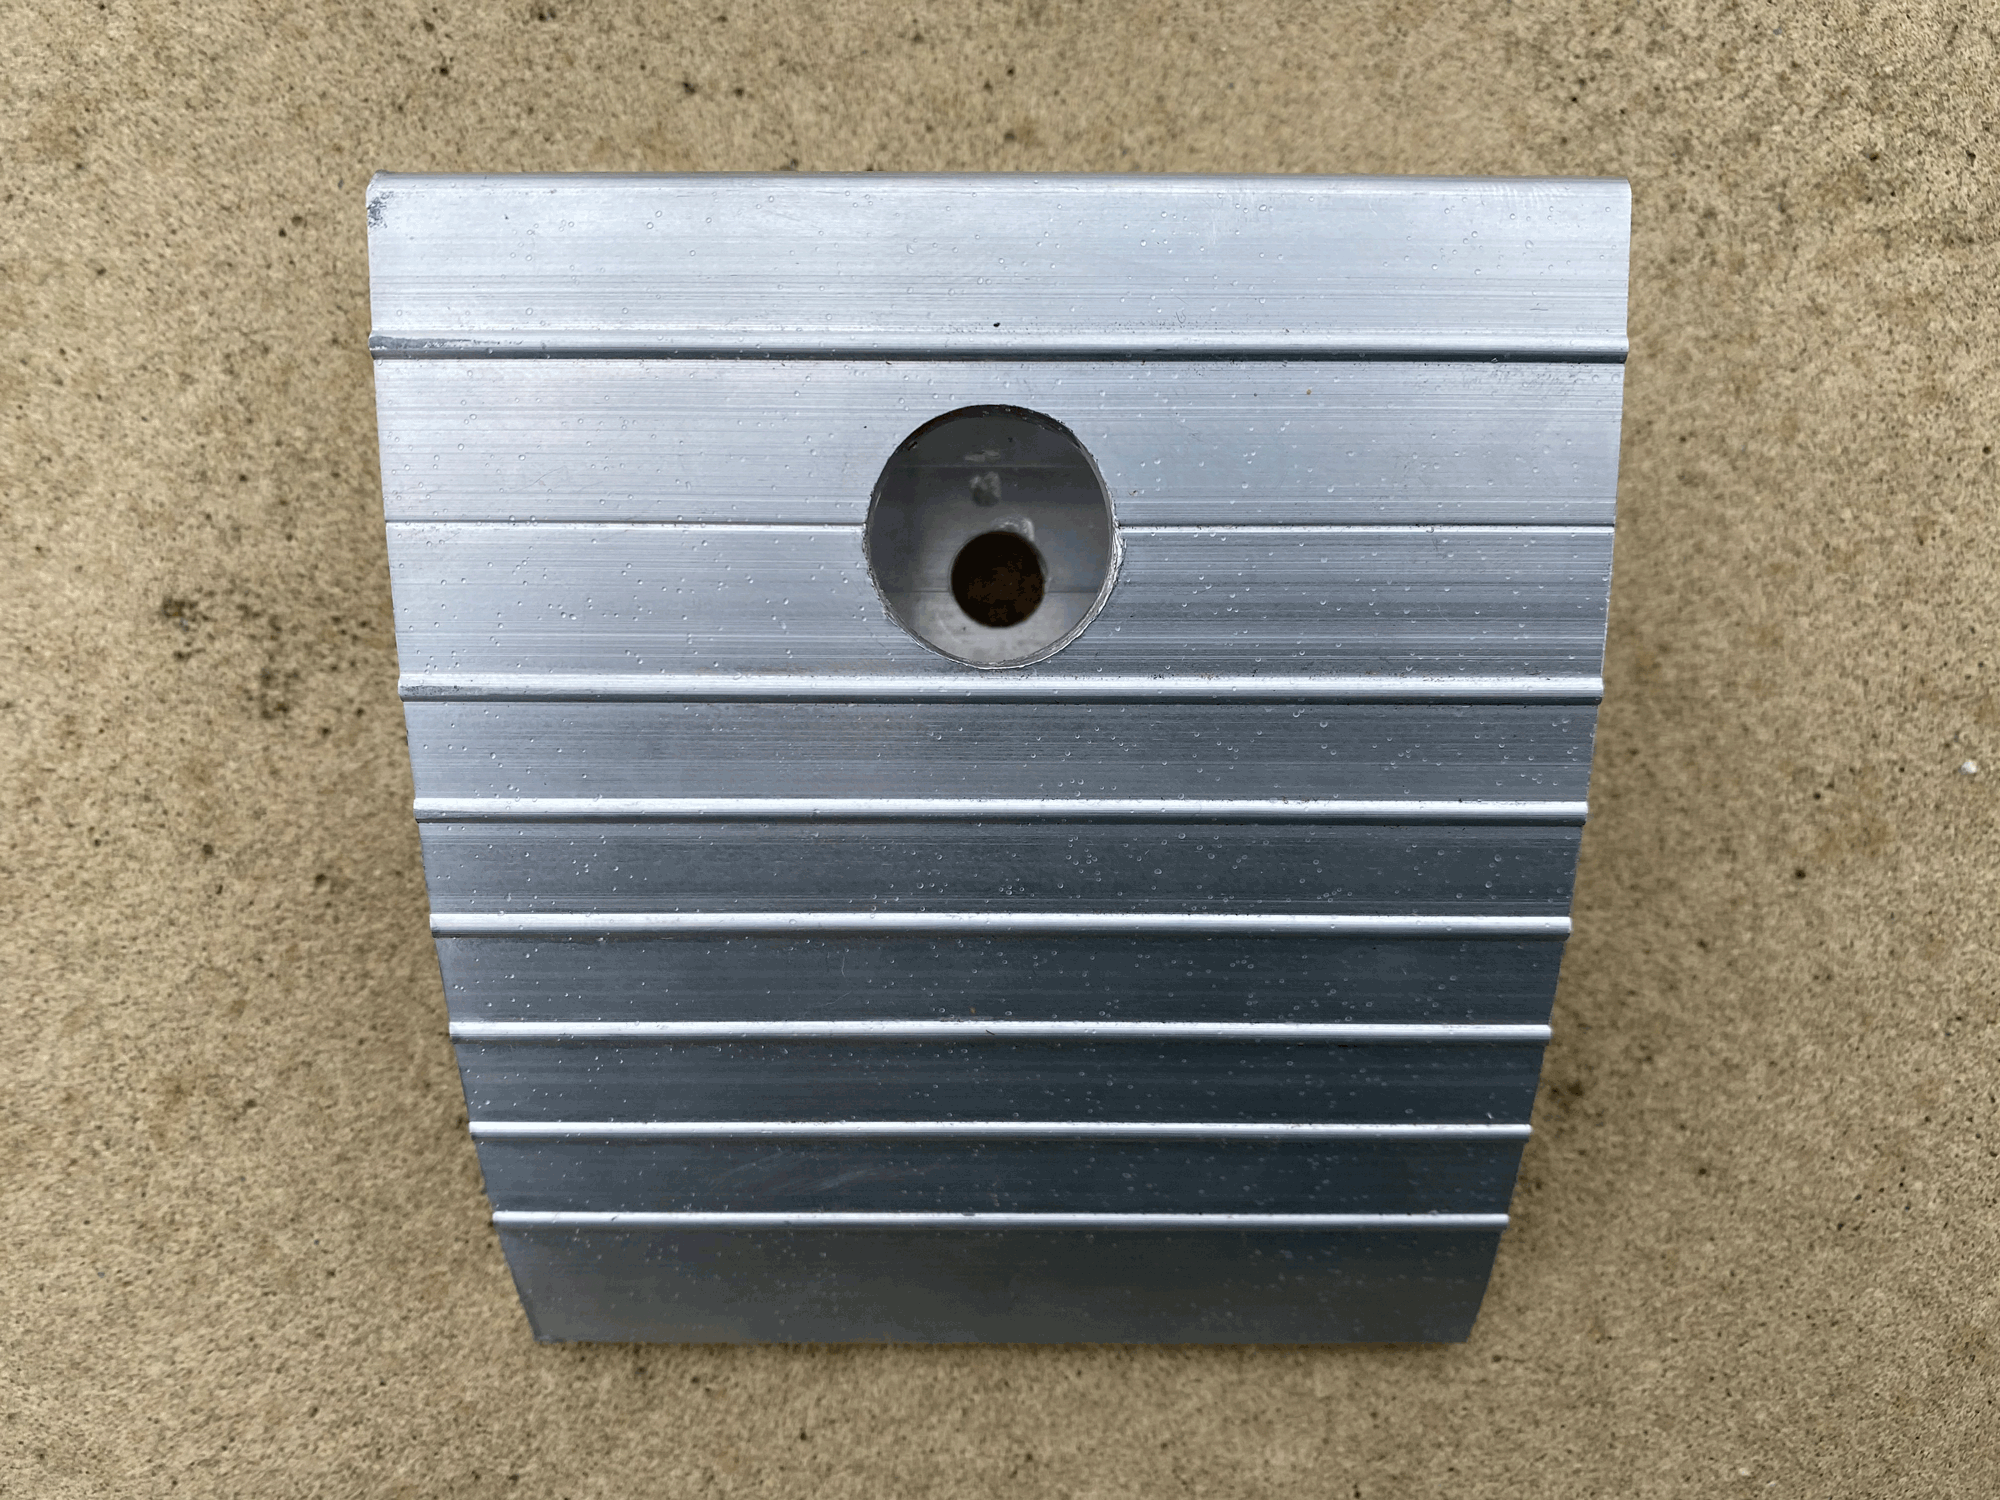 The Kirby Best Driveway Ramp Driveway Ramps Kerb-Ramps Curb-Ramp-DIY Ramp Mounting Holes for dynamic bolting in the gutter to stop people stealing the aluminium car ramp